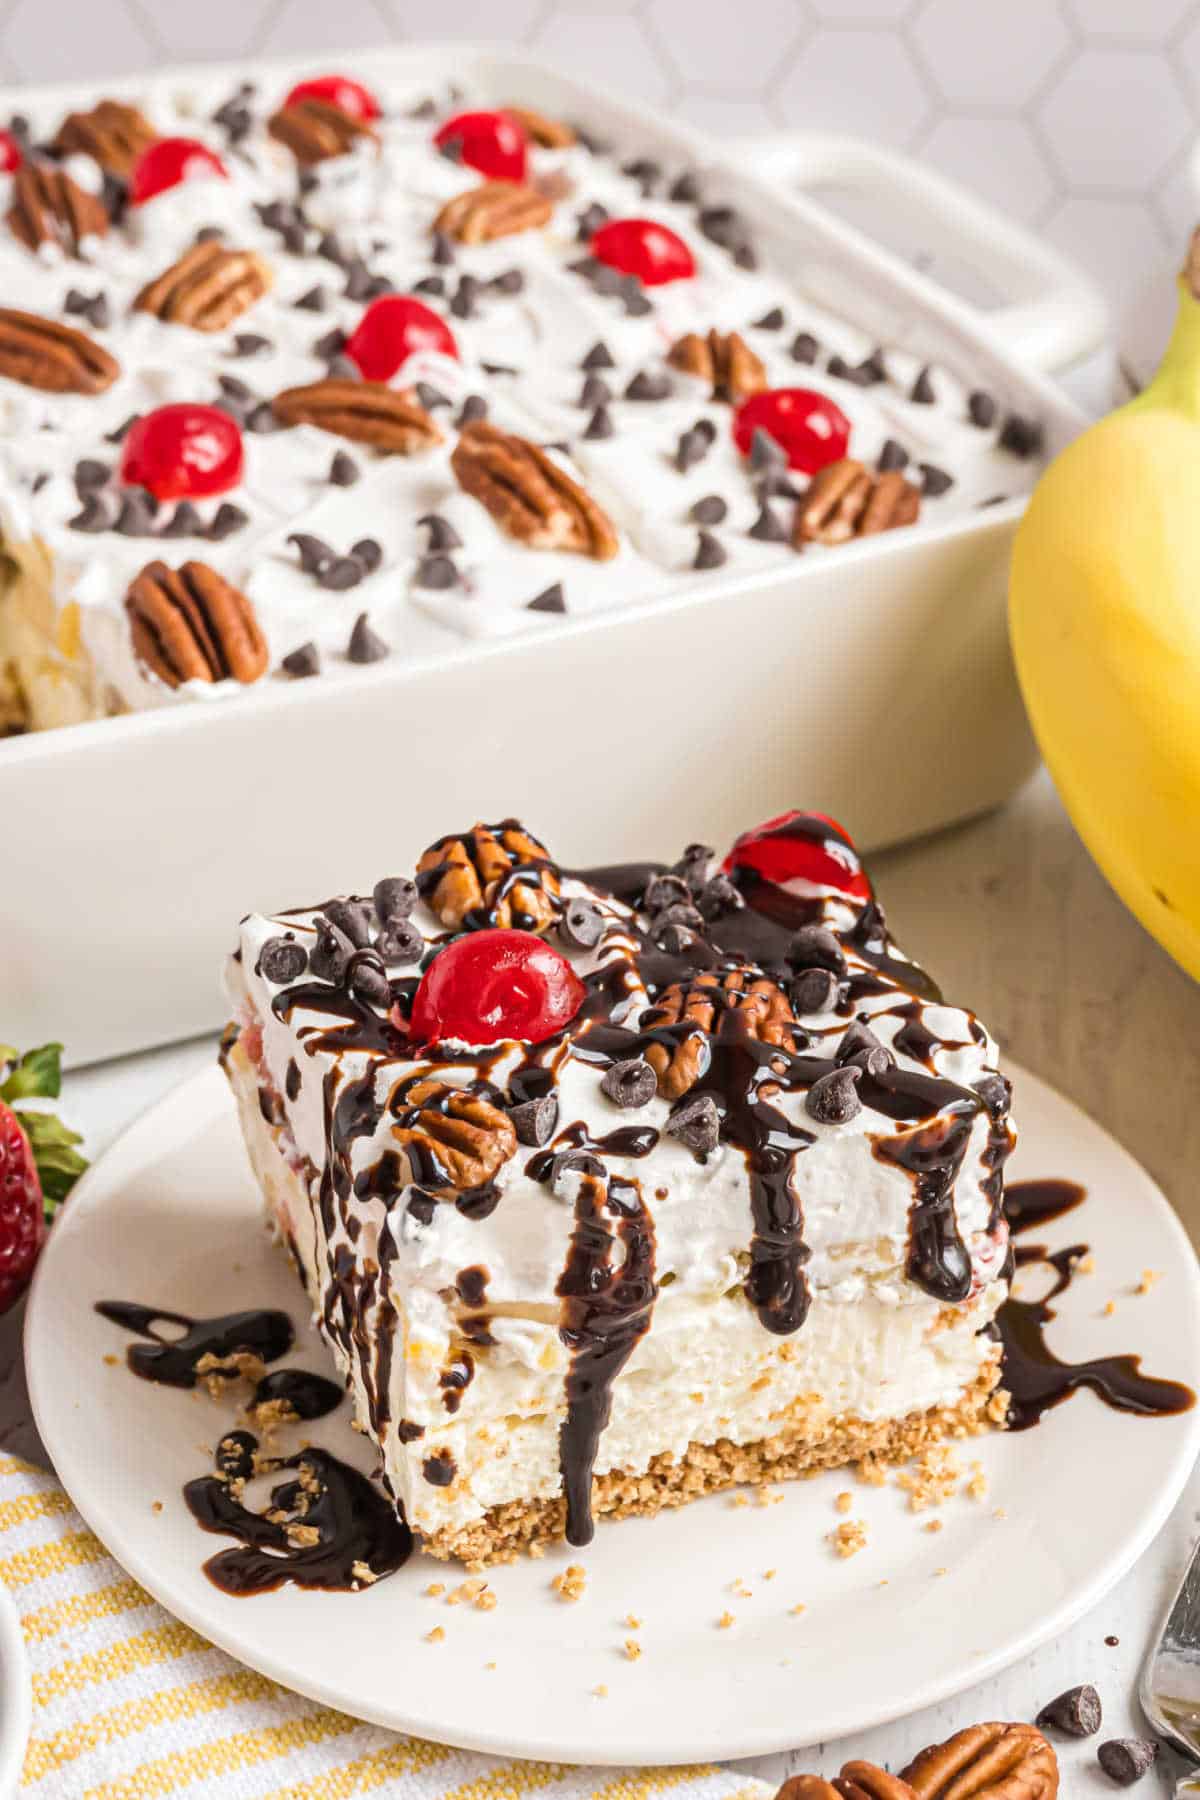 Slice of banana split dessert drizzled with chocolate syrup.